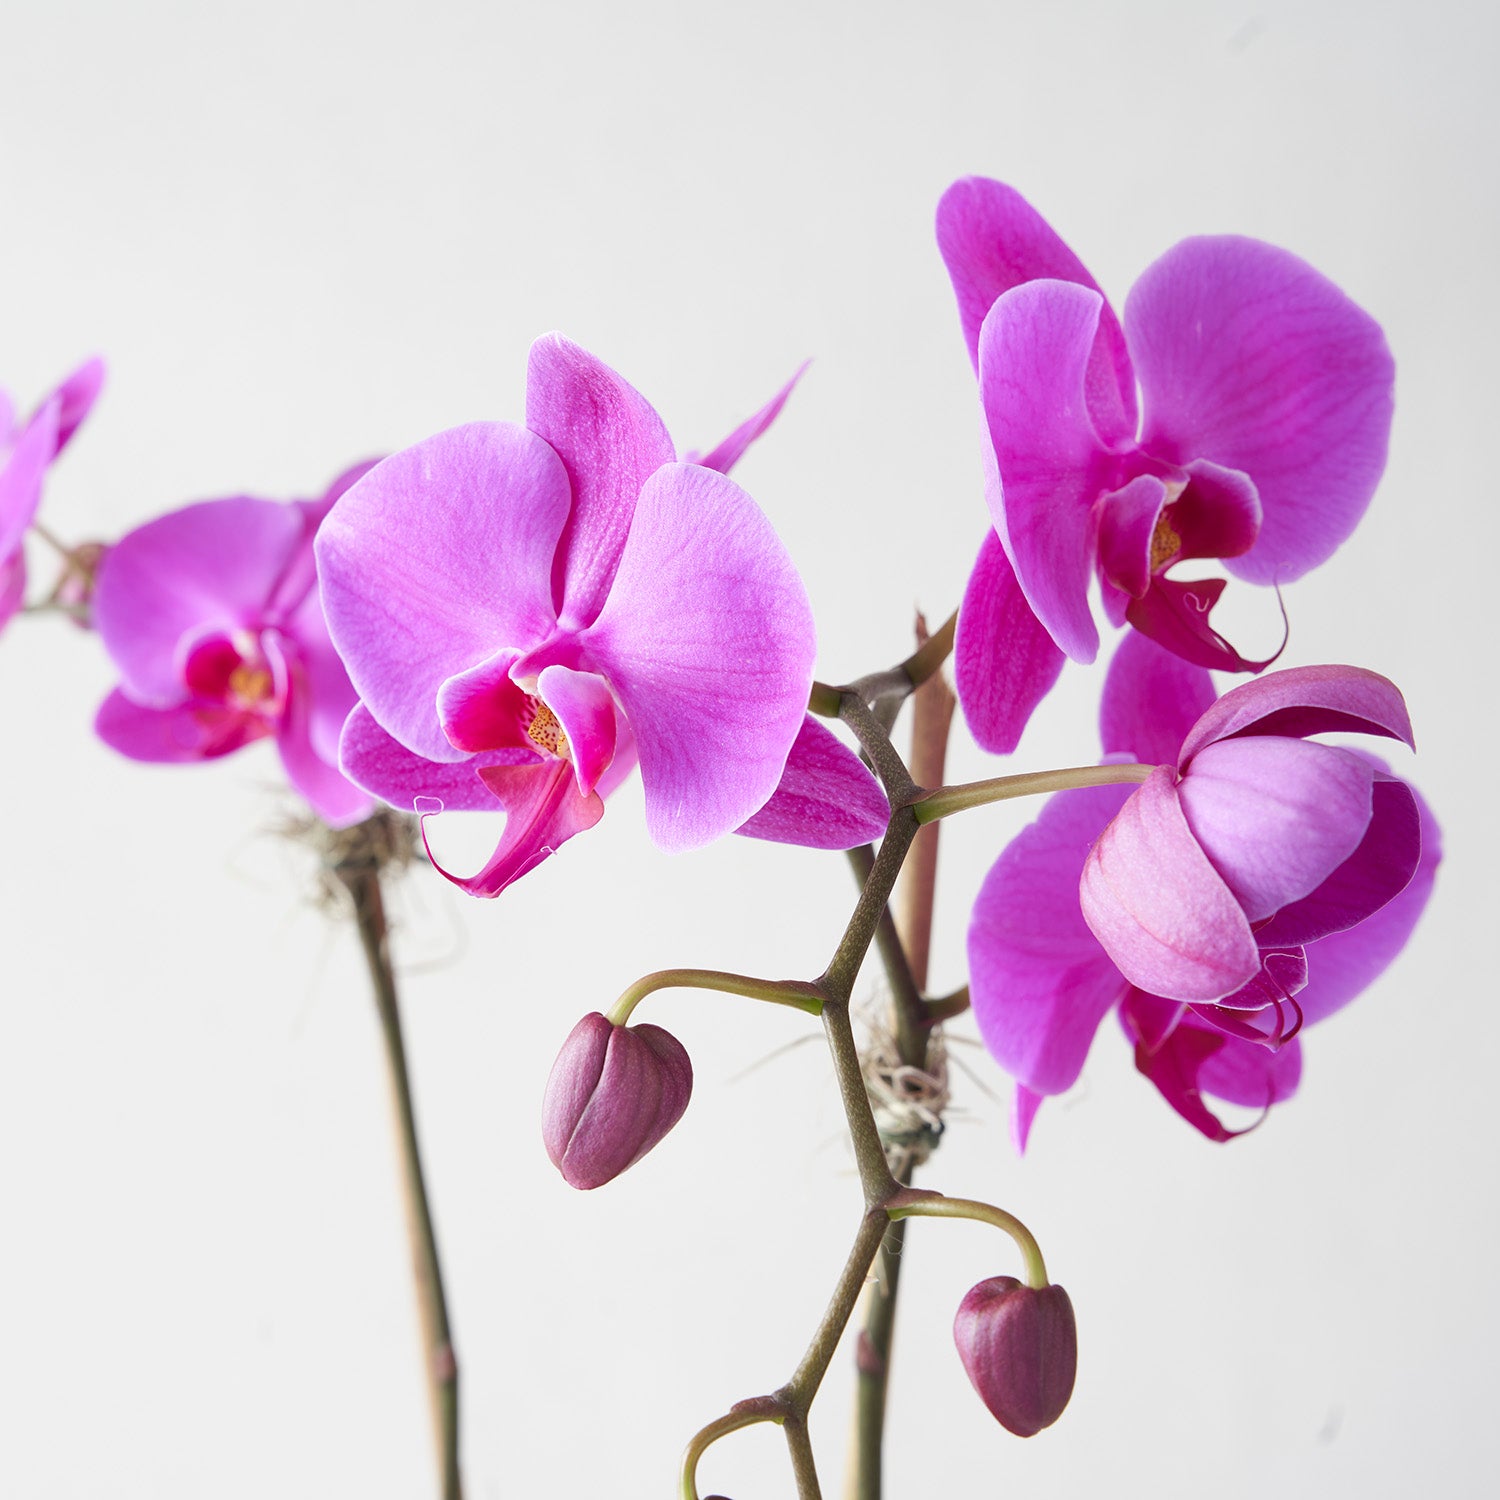 Closeup of fuchsia phalaenopsis orchid flowers and buds on white background.